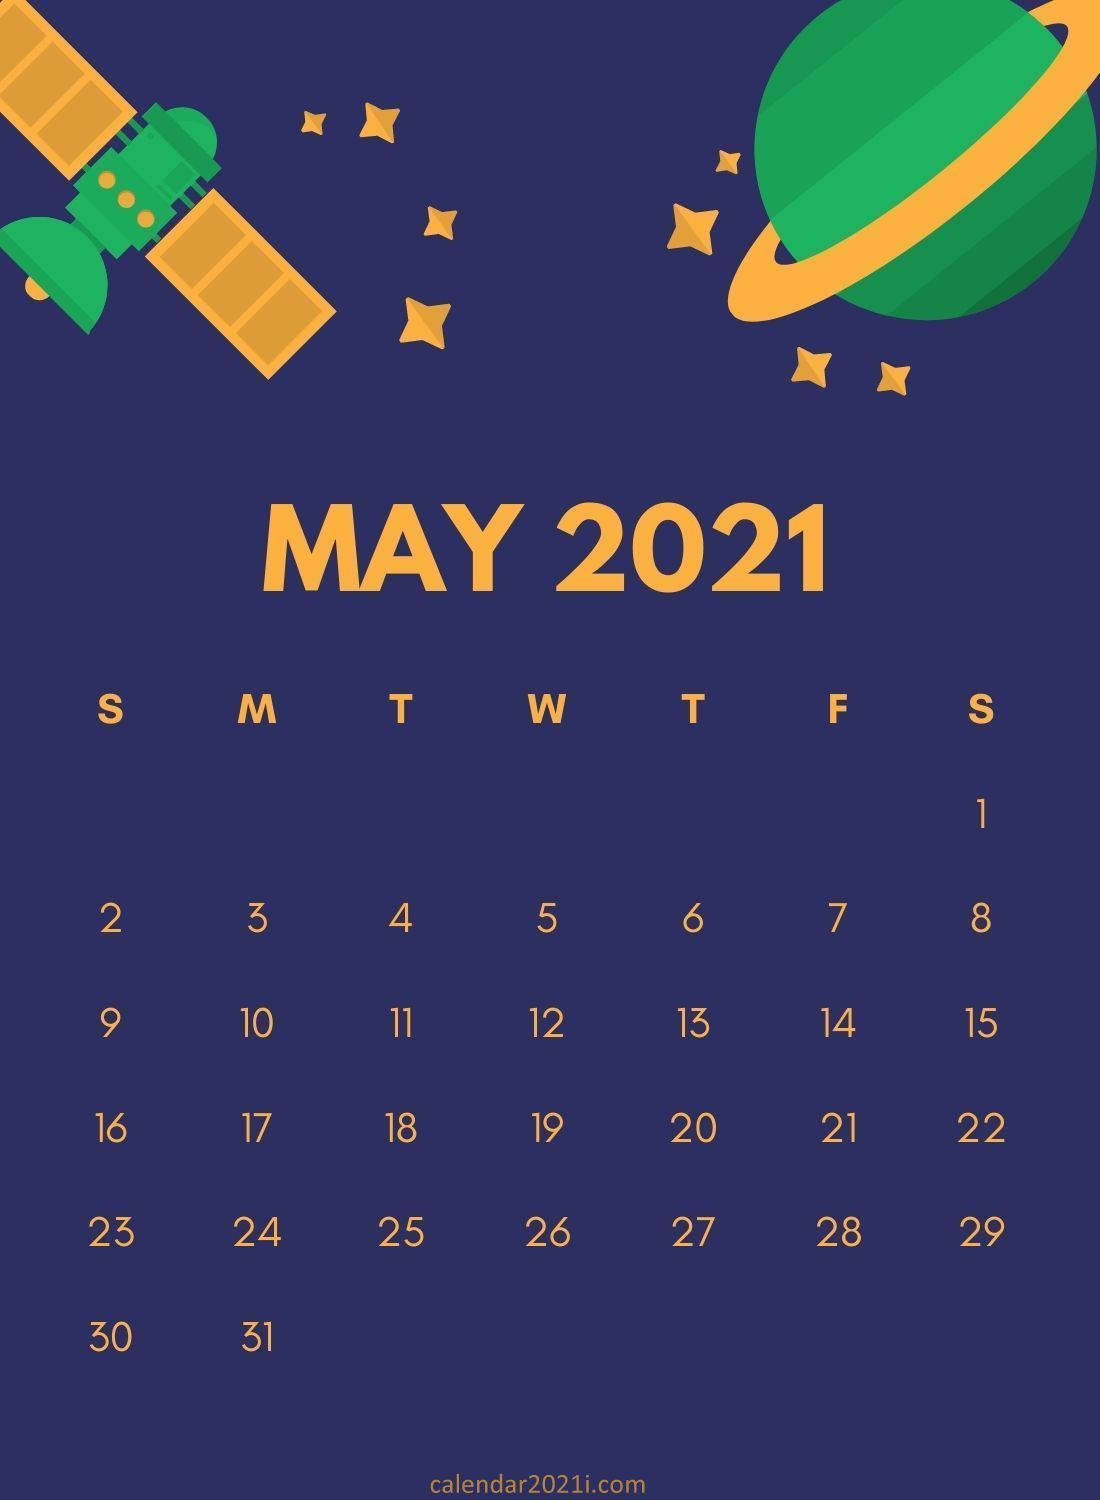 Mark Your Important Dates in Style with this Cute Space Art May 2021 Calendar Wallpaper